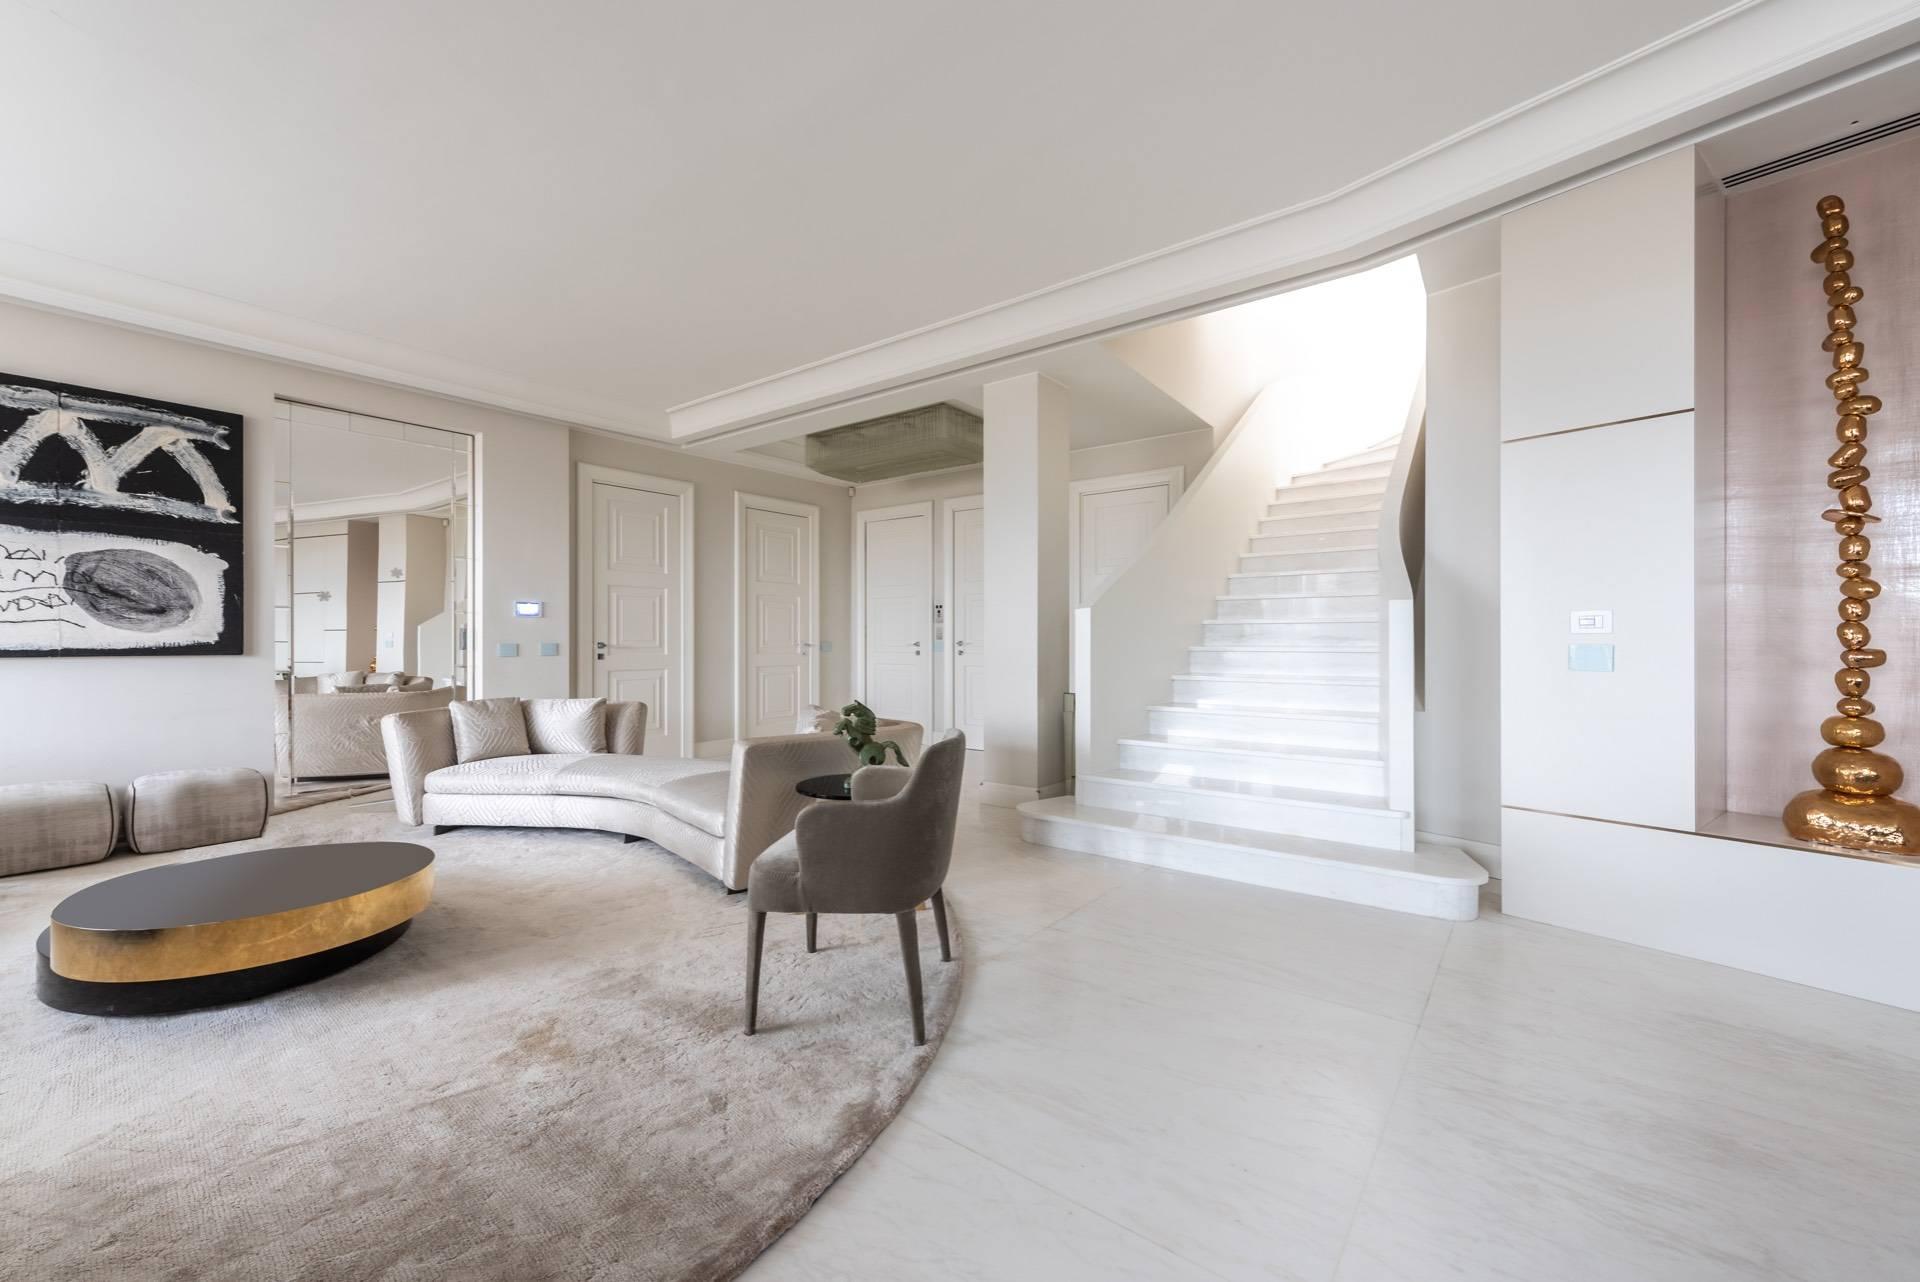 Incomparable penthouse with 400 sqm terrace - 13